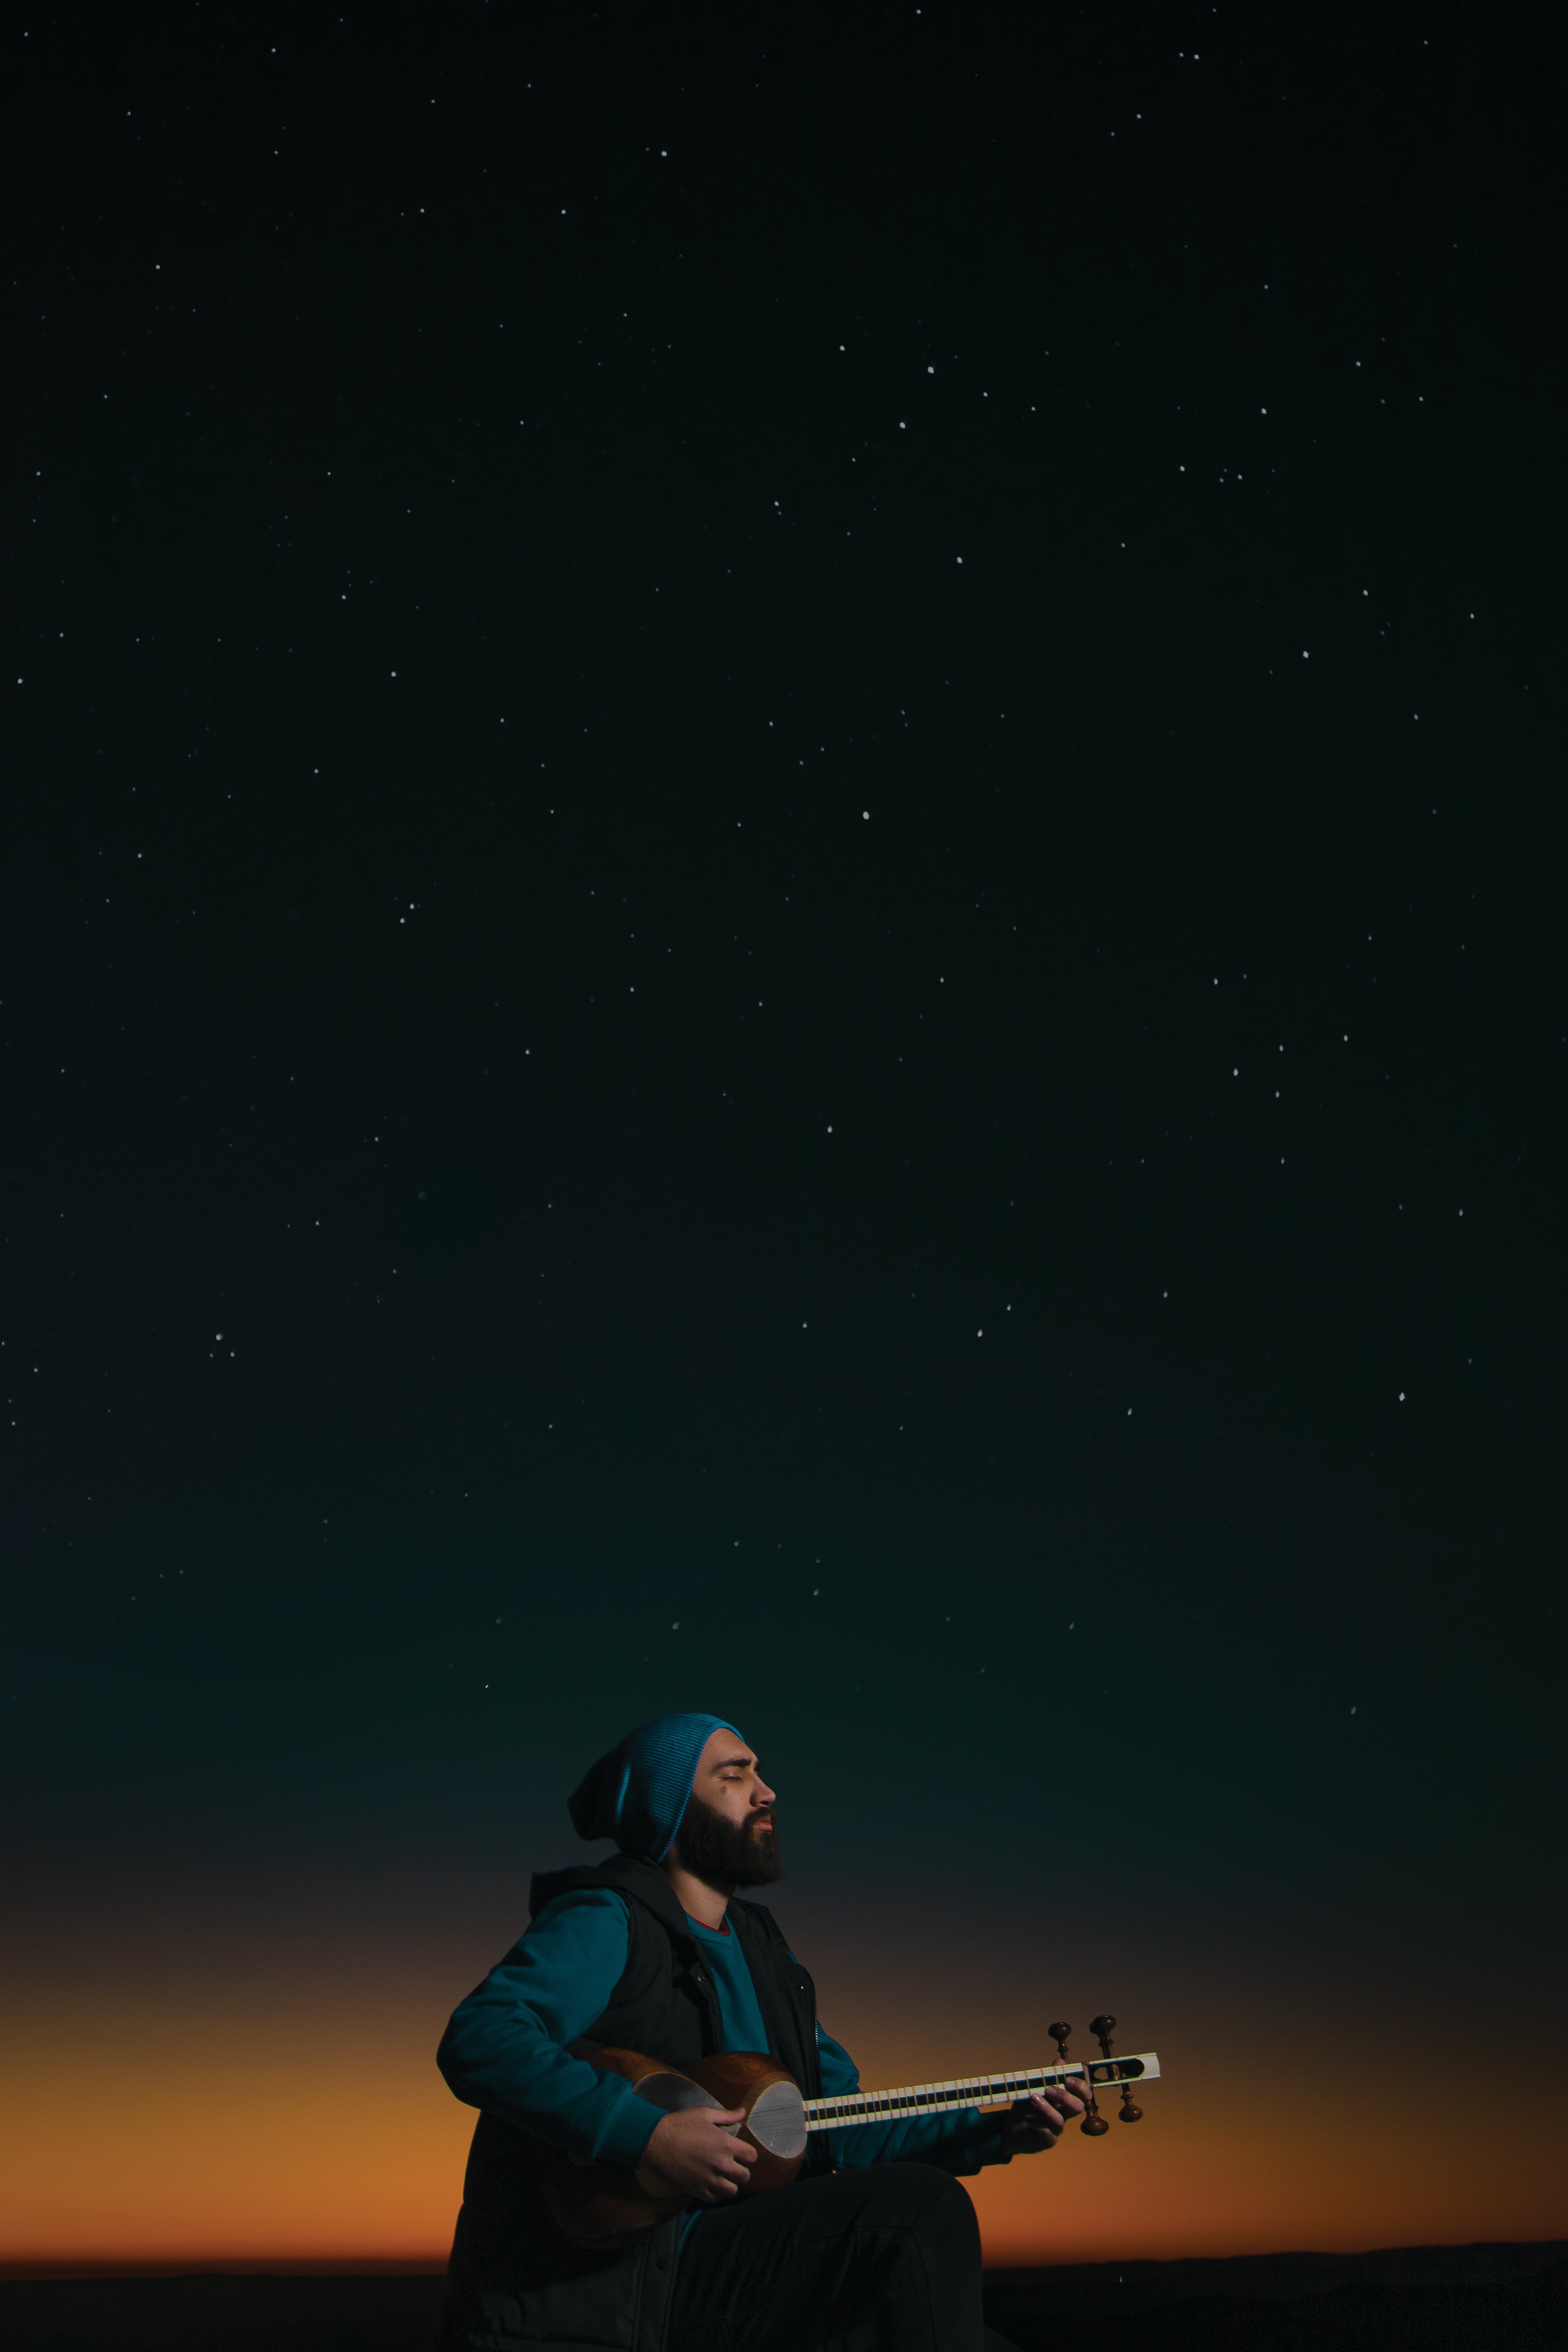 A man playing guitar underneath a starry sky. | Source: Pexels